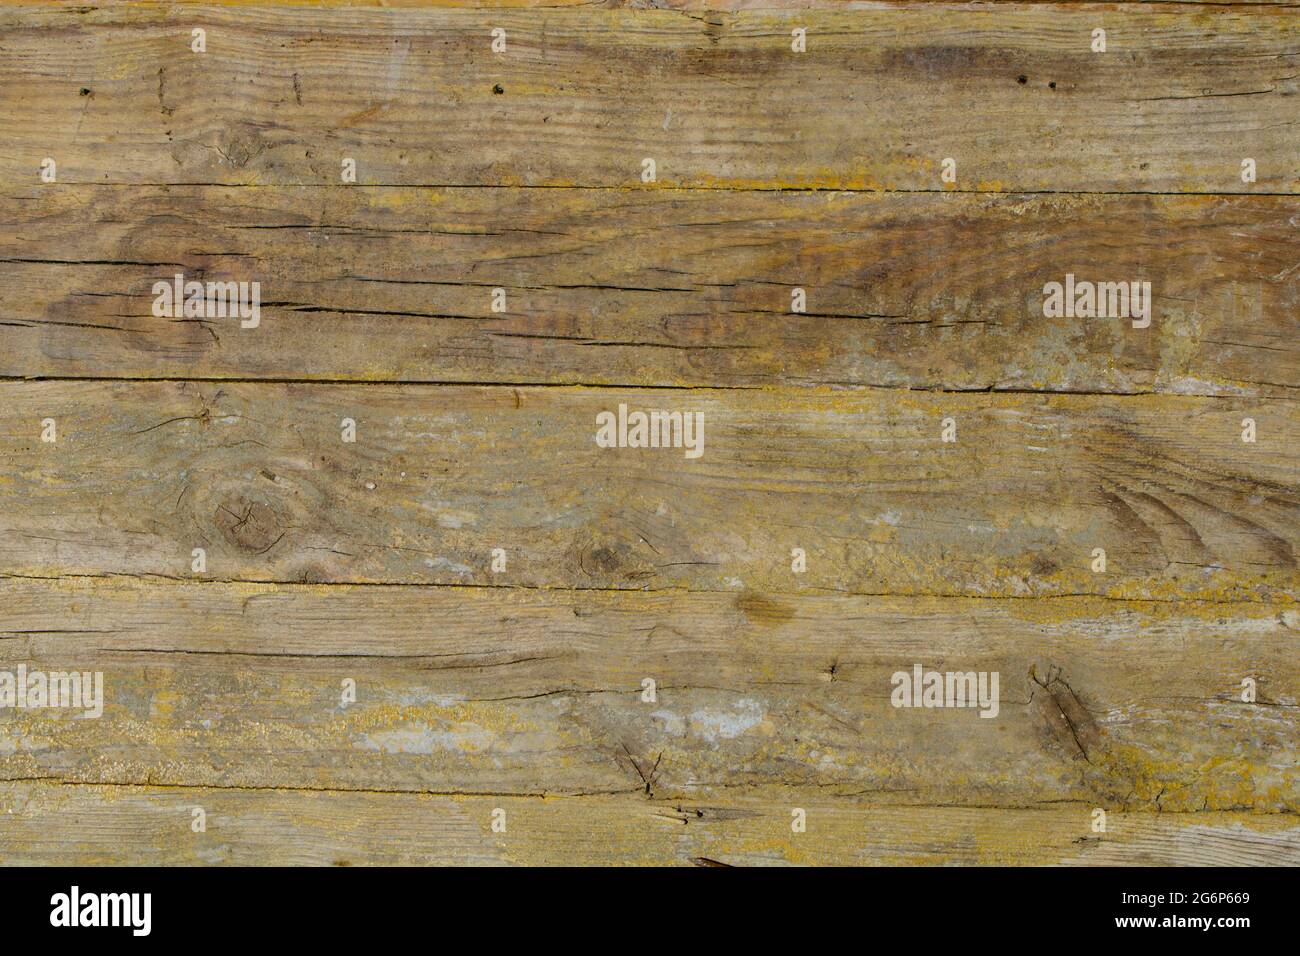 Wood pine texture with knots Stock Photo